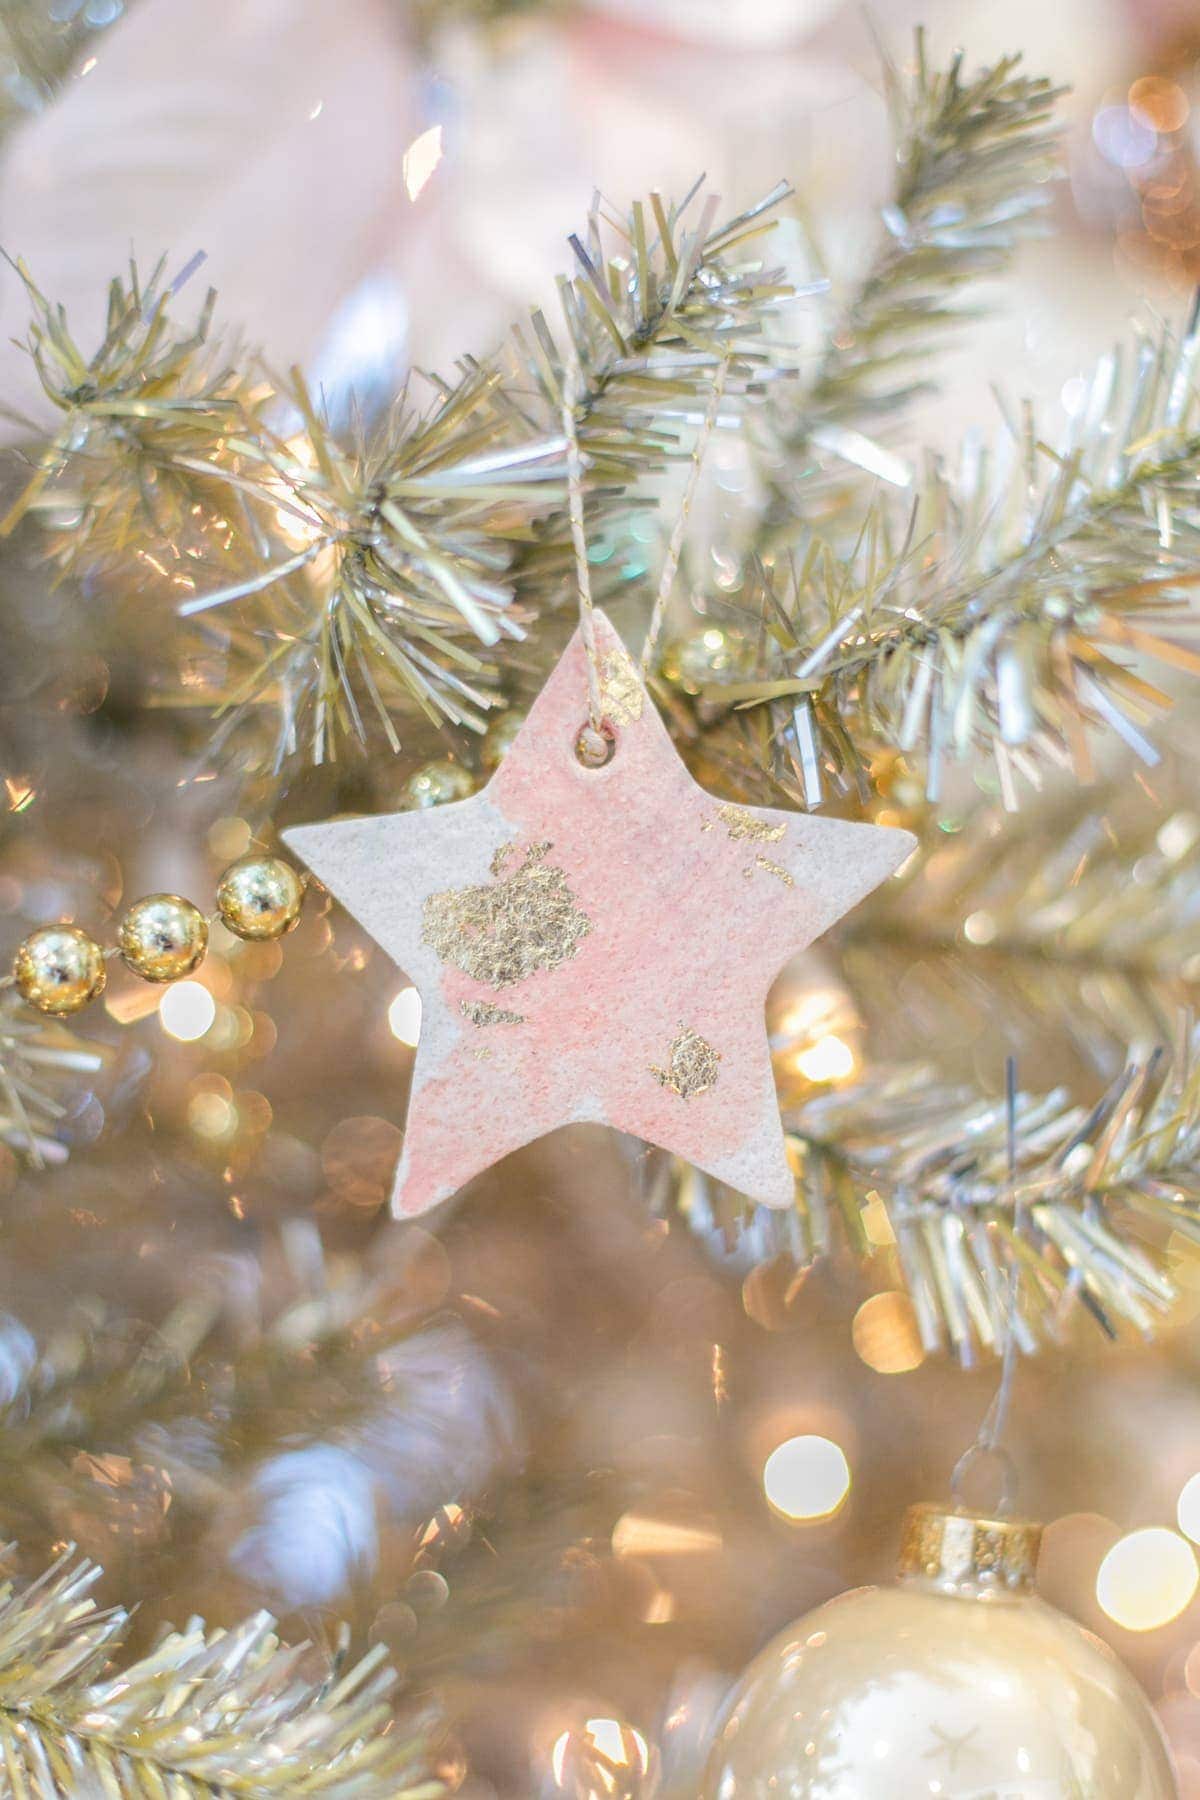 Star shaped salt dough ornament with gold accents.